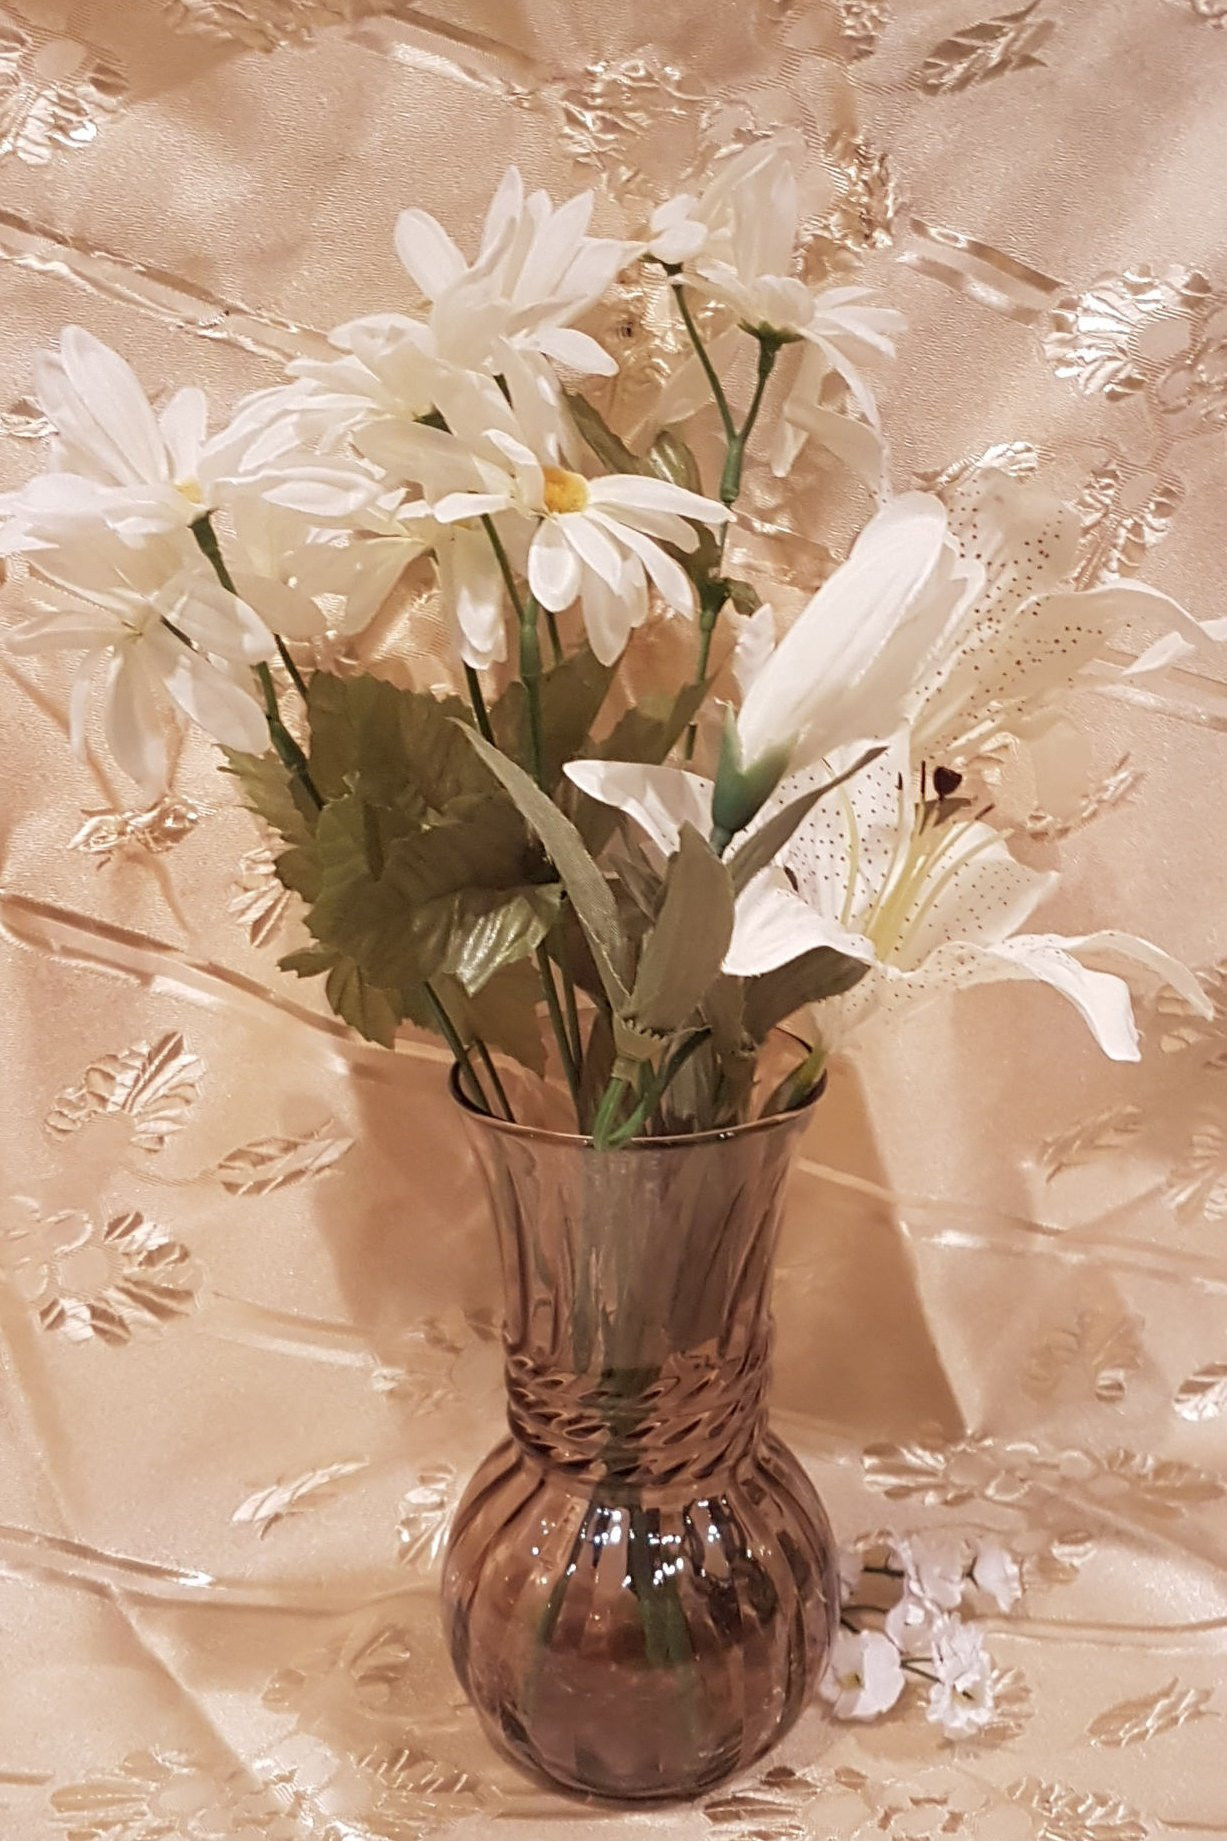 18 Recommended Anchor Hocking Glass Vases 2023 free download anchor hocking glass vases of anchor hocking vintage smoke brown optic swirl glass vase pertaining to il fullxfull 1478200881 4sau